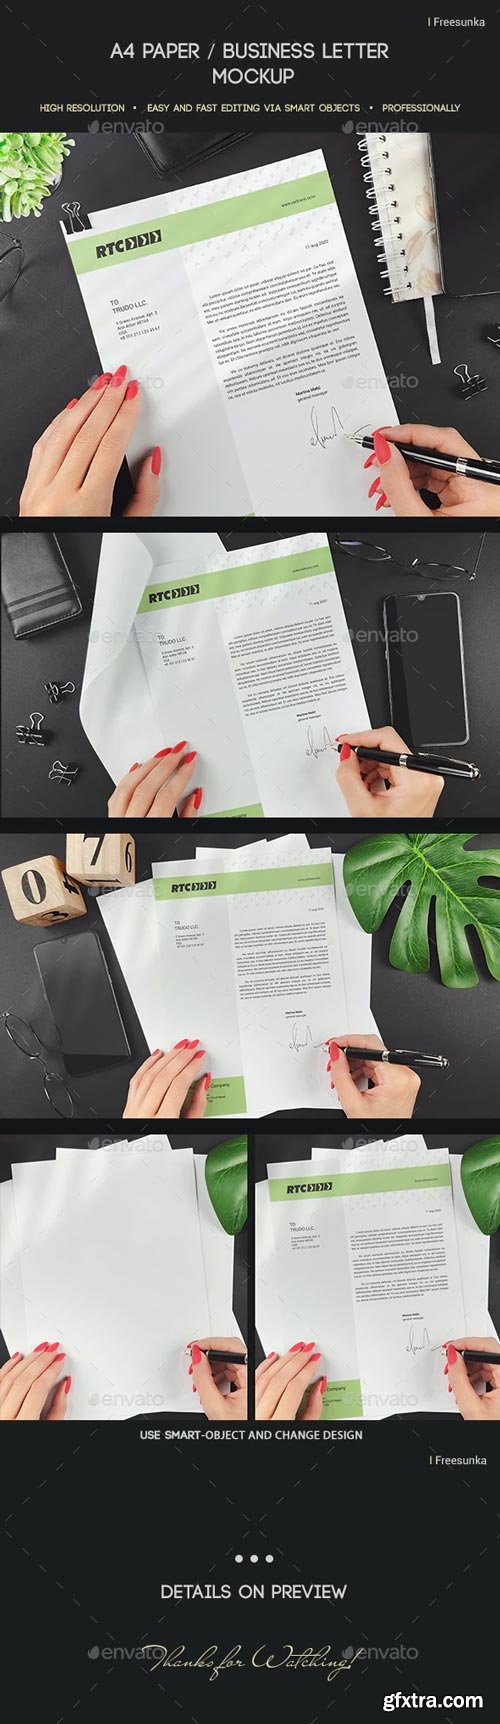 GraphicRiver - A4 Paper / Business Letter Mockup - 29480446